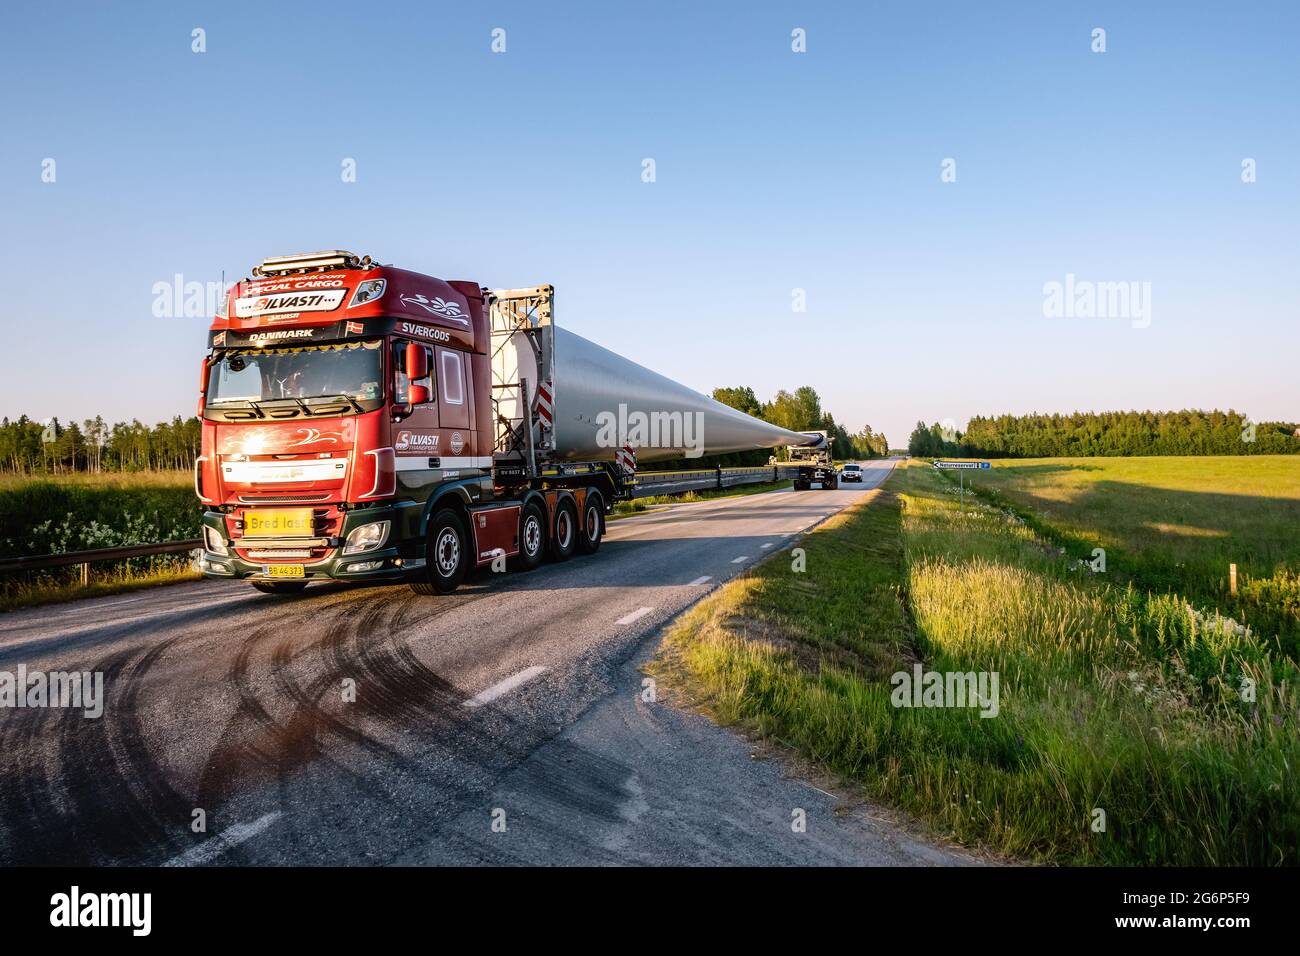 UMEA, SWEDEN - July 04, 2021: Transportation of one very long wind turbine propeller blade on small countryside road. Modern highway tractor, escorted Stock Photo